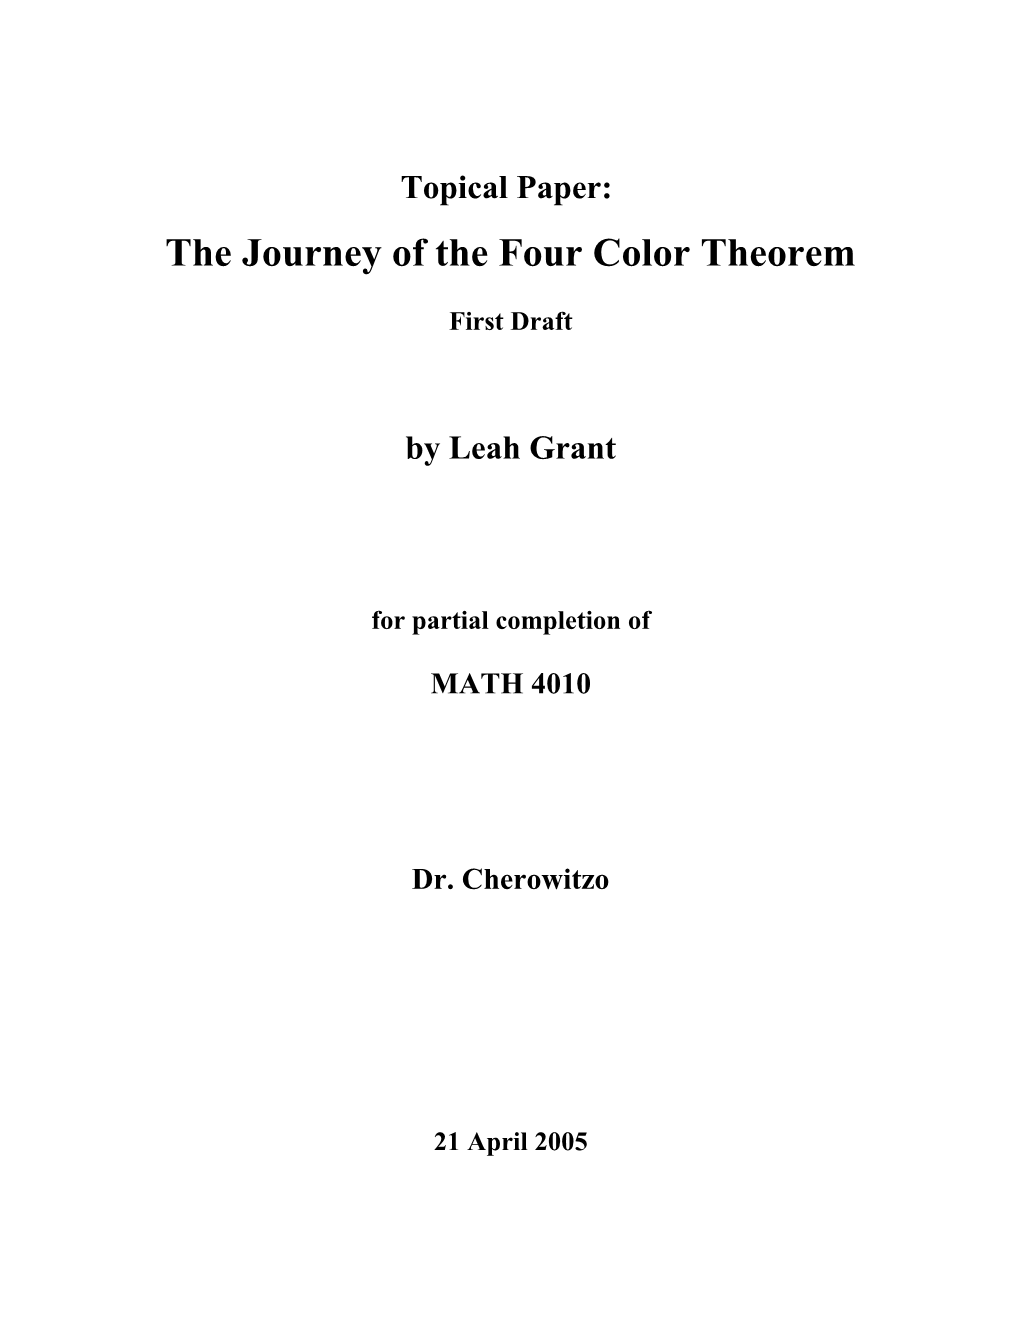 The Journey of the Four Color Theorem